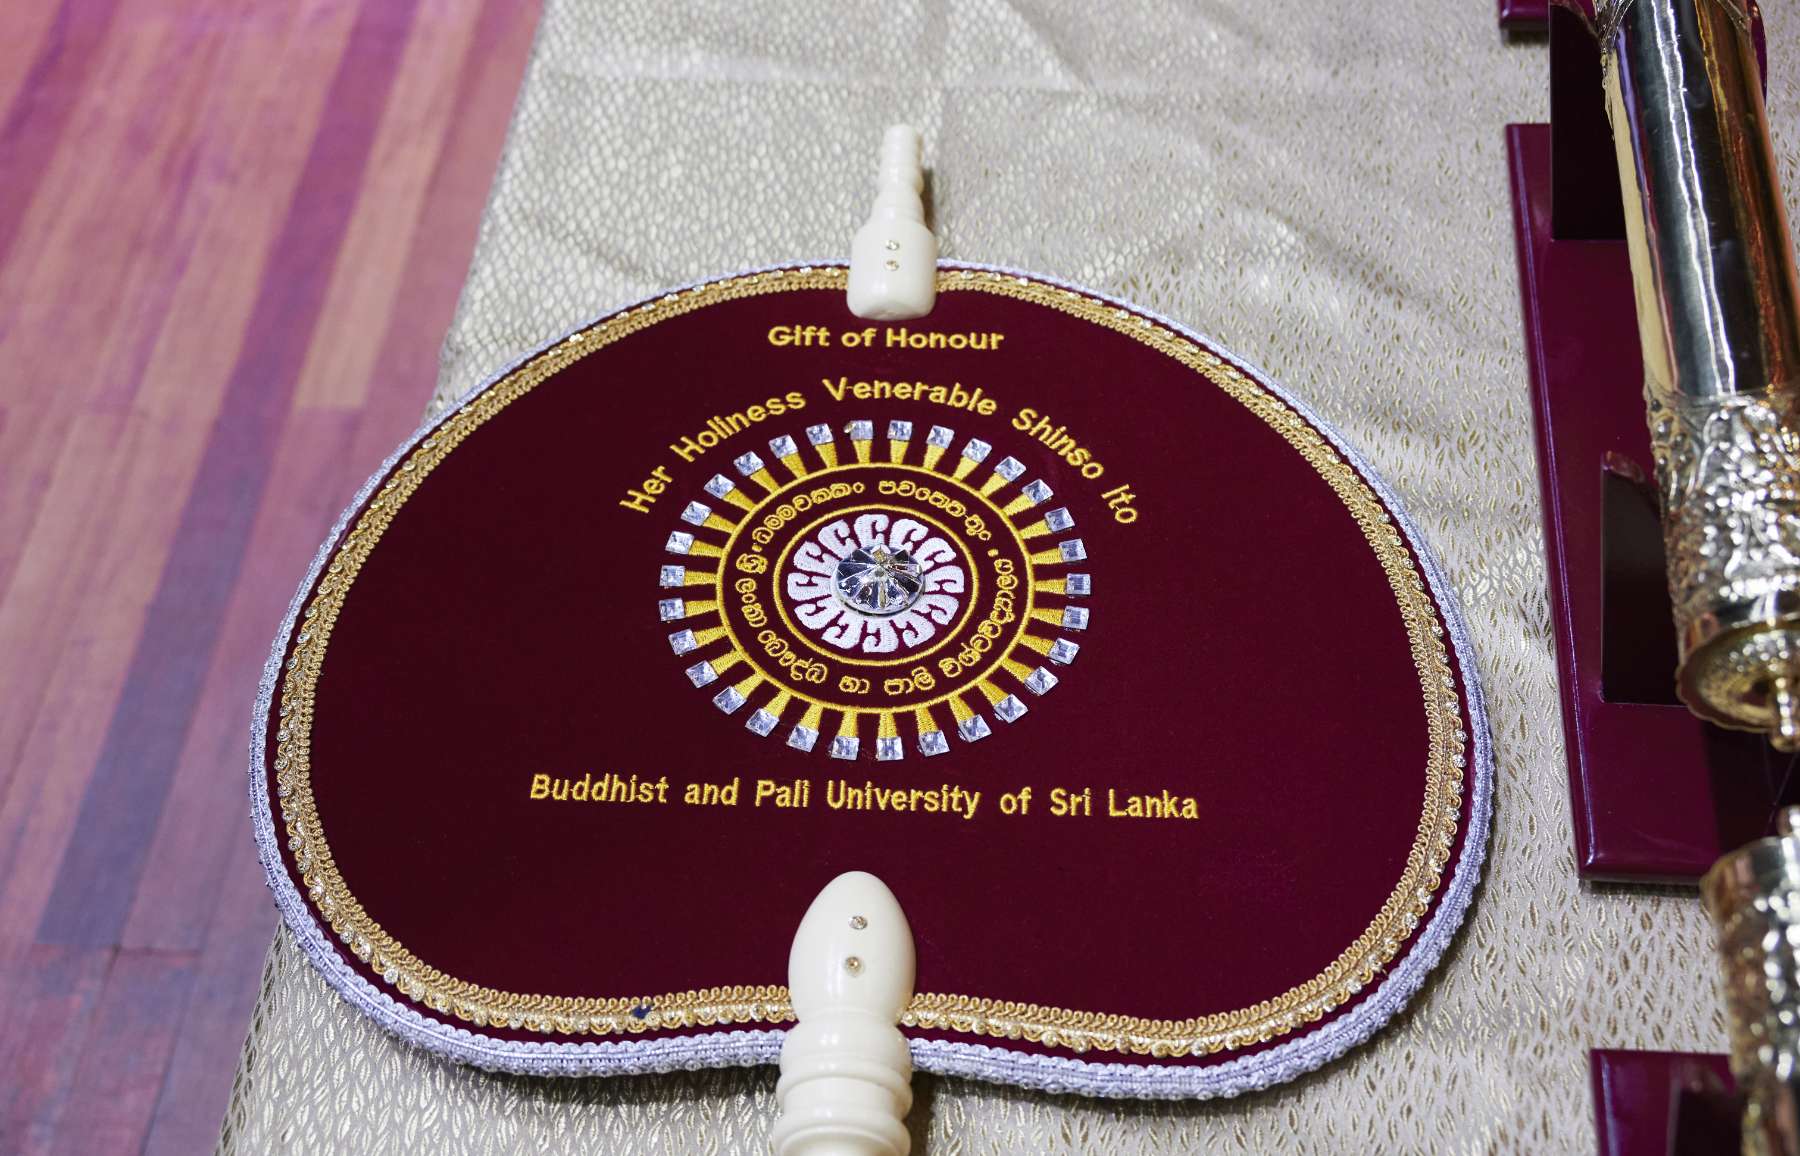 A maroon ceremonial hand-held fan decorated with a circular pattern, Singala letters, and the words, “Gift of Honour, Her Holiness Shinso Ito, Buddhist and Pali University of Sri Lanka.”